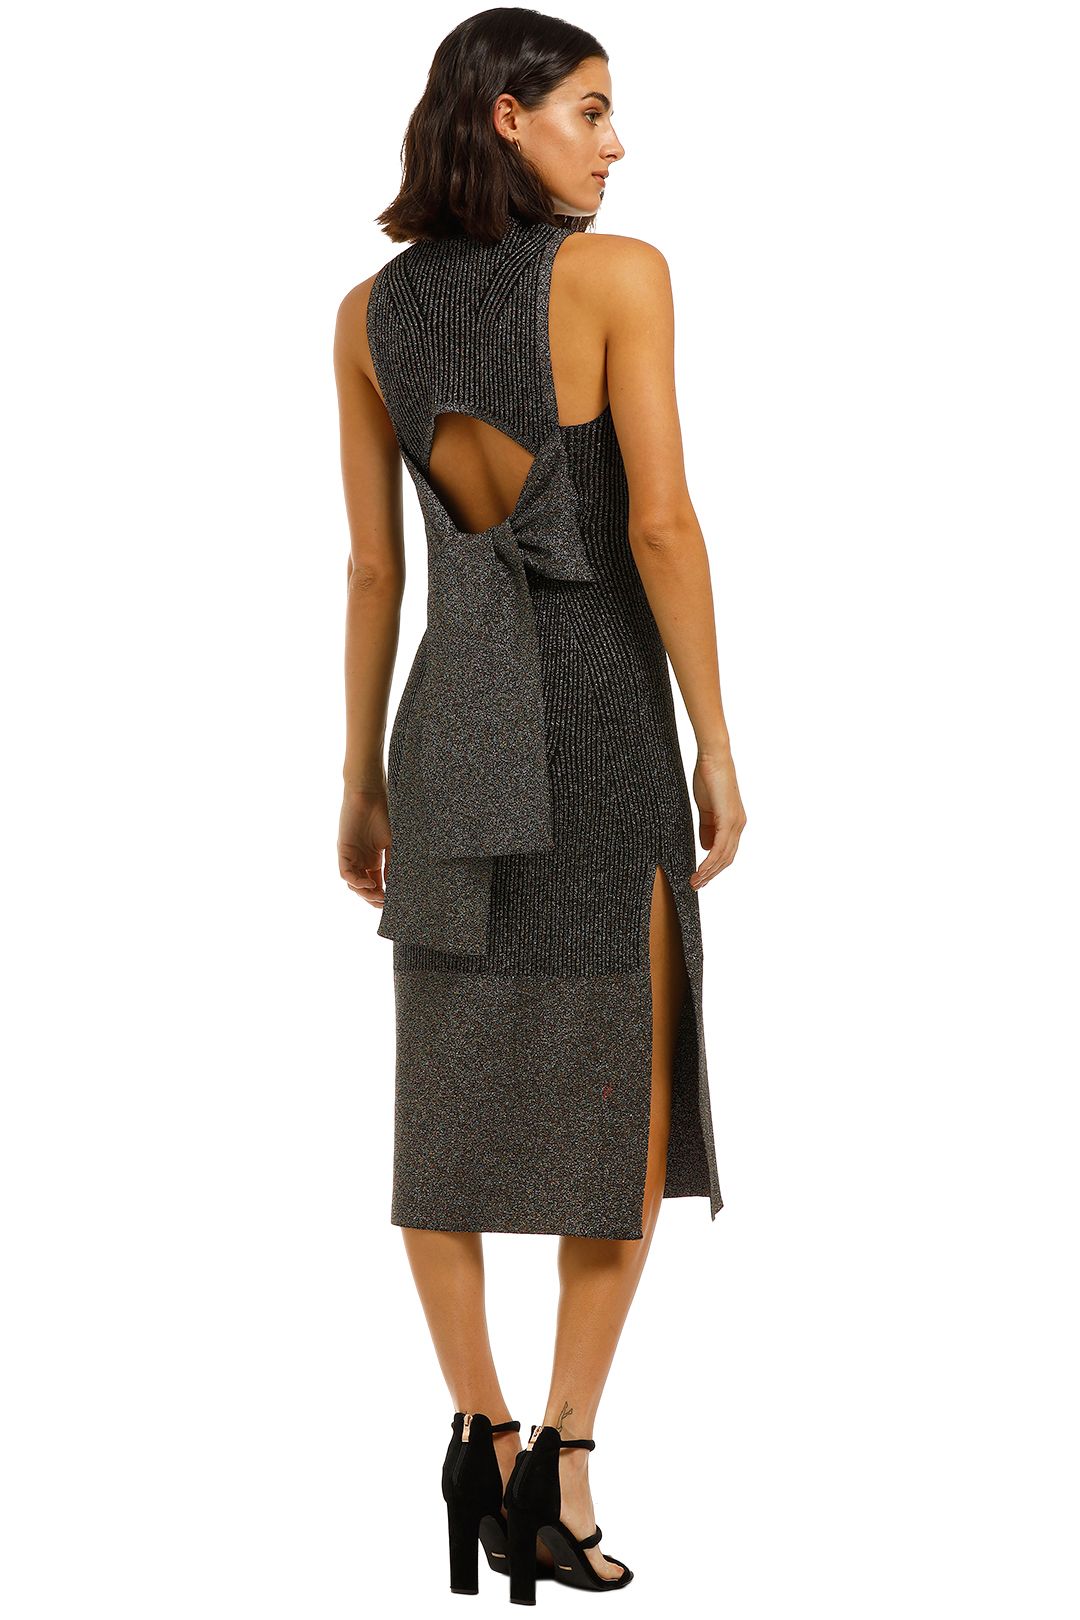 Camilla-and-Marc-Perry-Dress-Gunmetal-Back